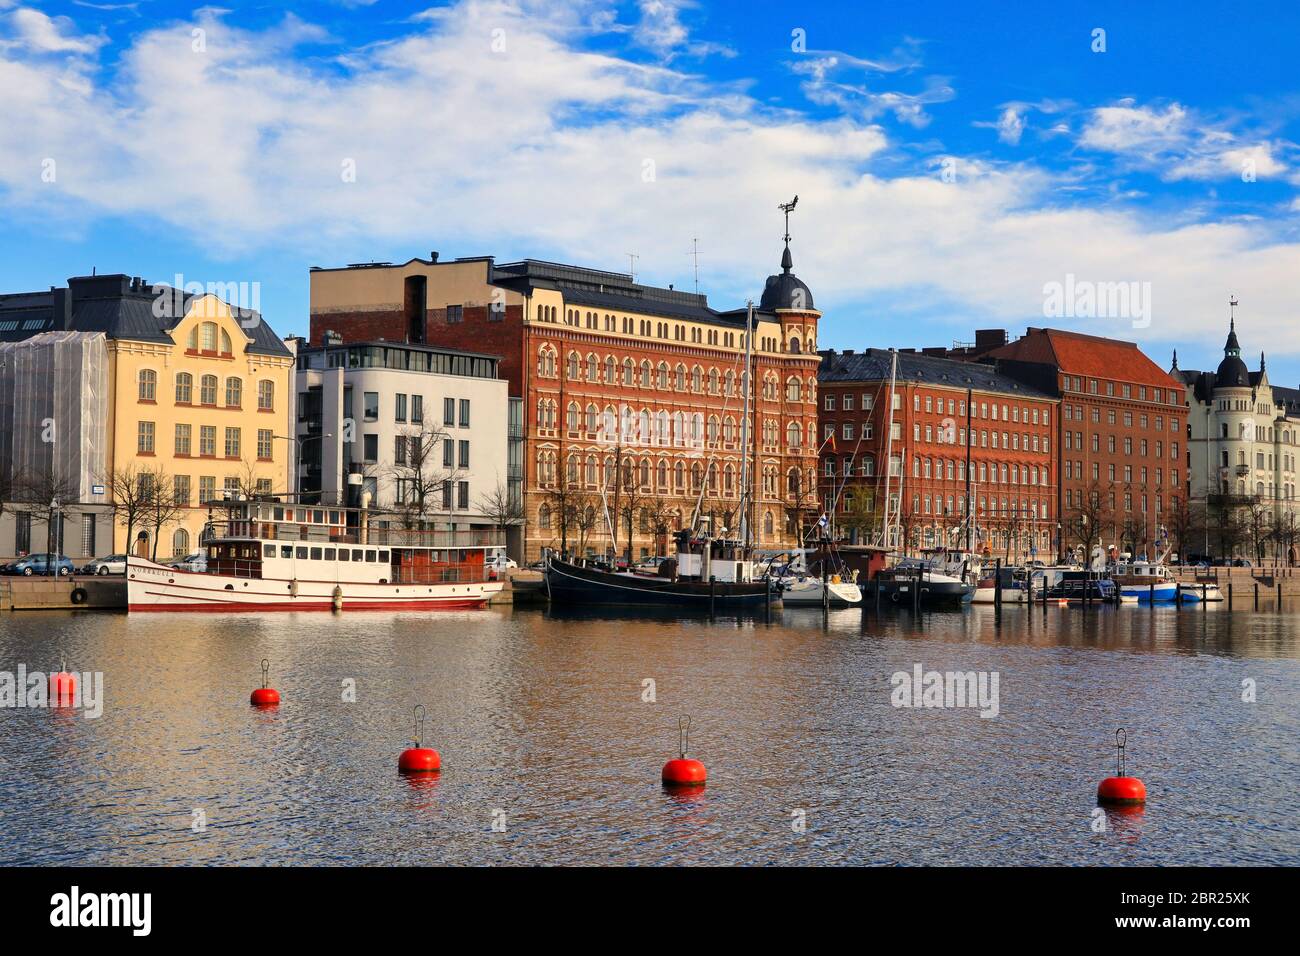 Pohjoisranta embankment on a beautiful day with historic architecture, moored recreational boats and red buyos. Helsinki, Finland. May 2020. Stock Photo